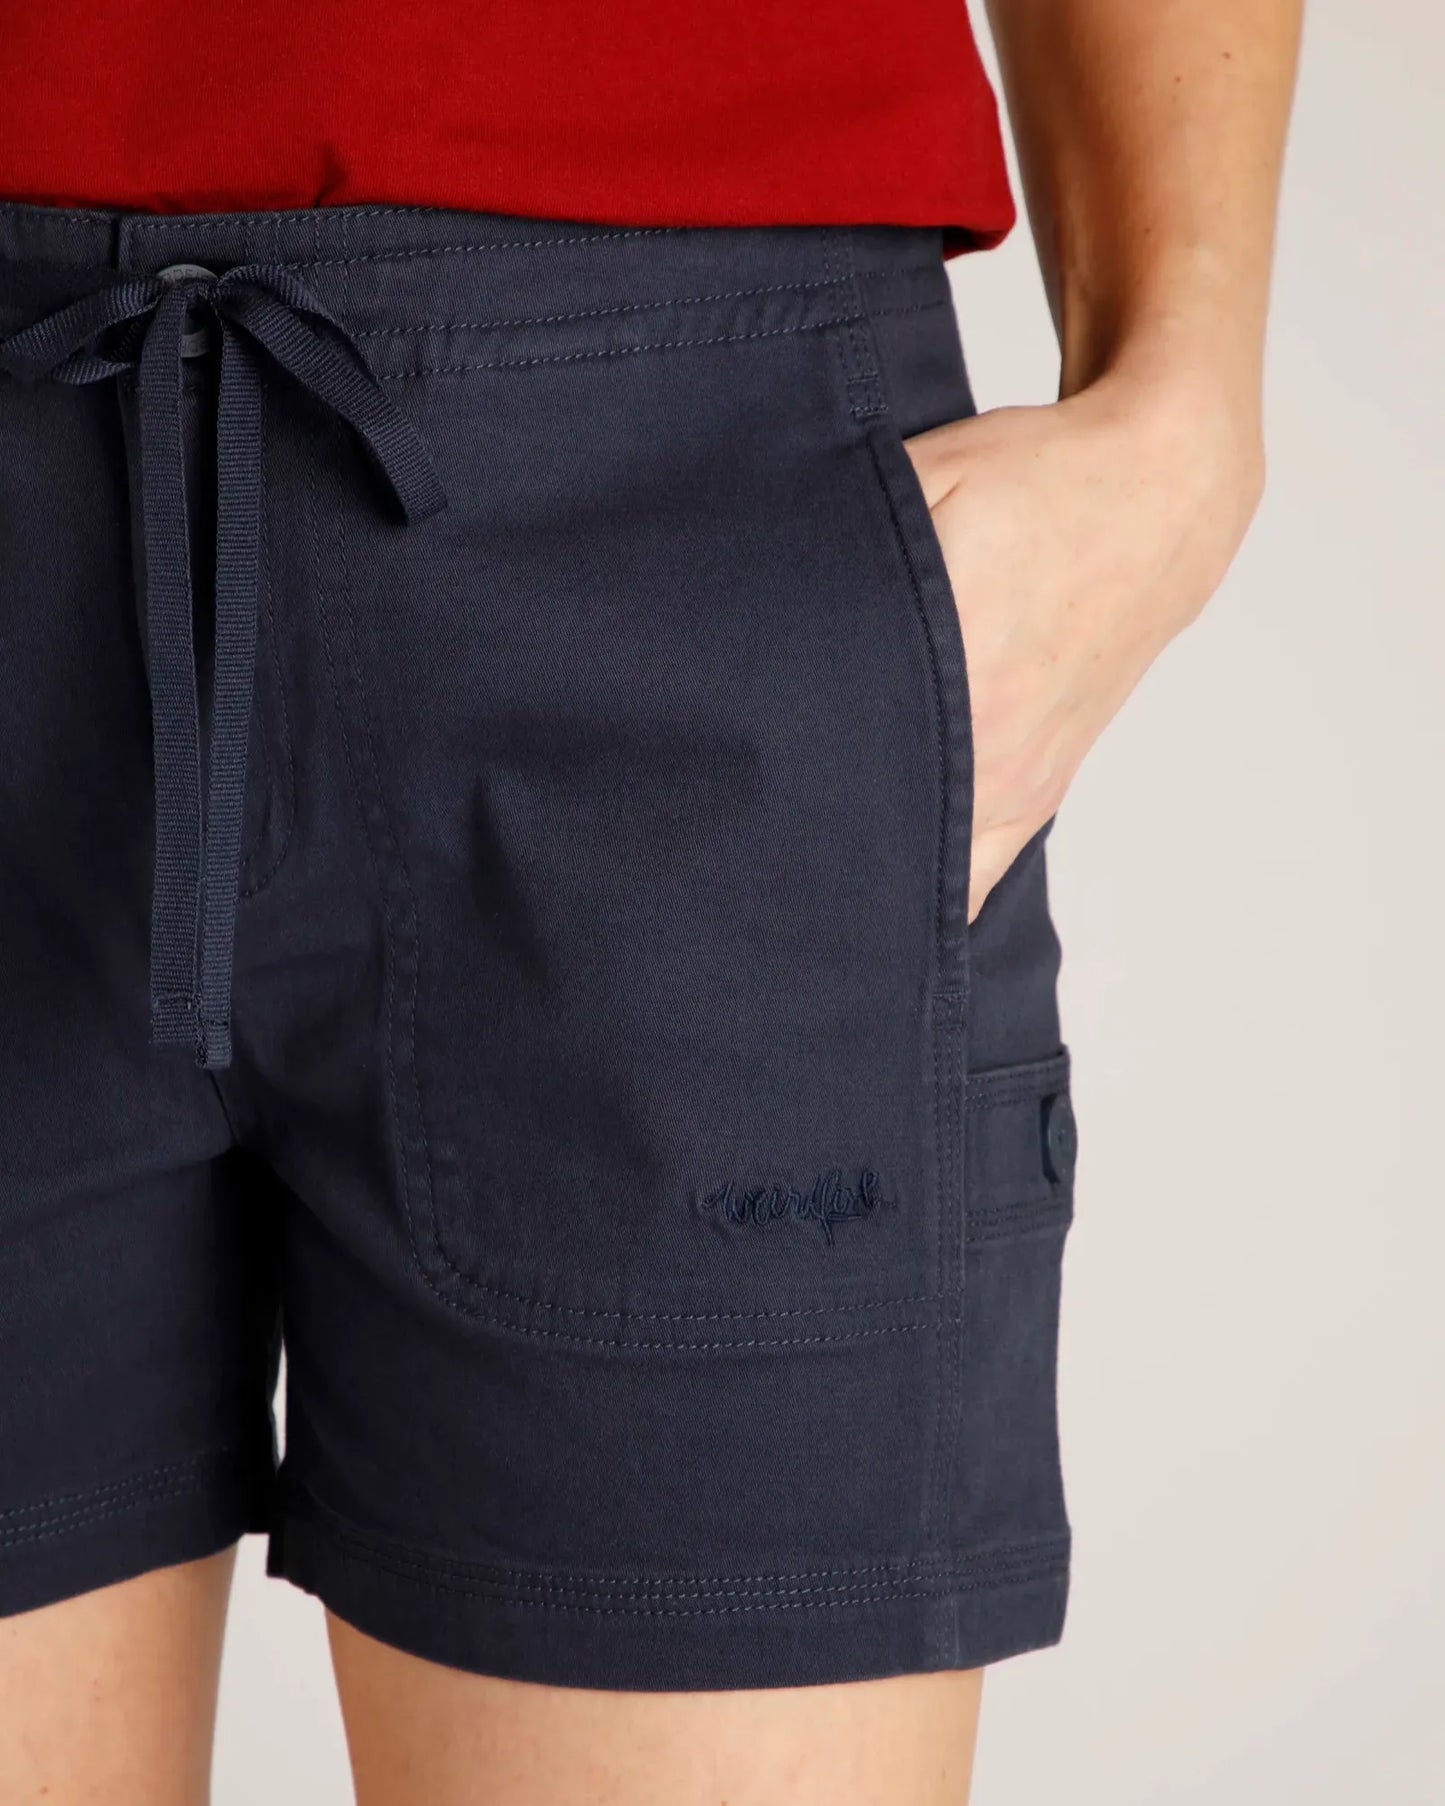 Willoughby Shorts - Navy